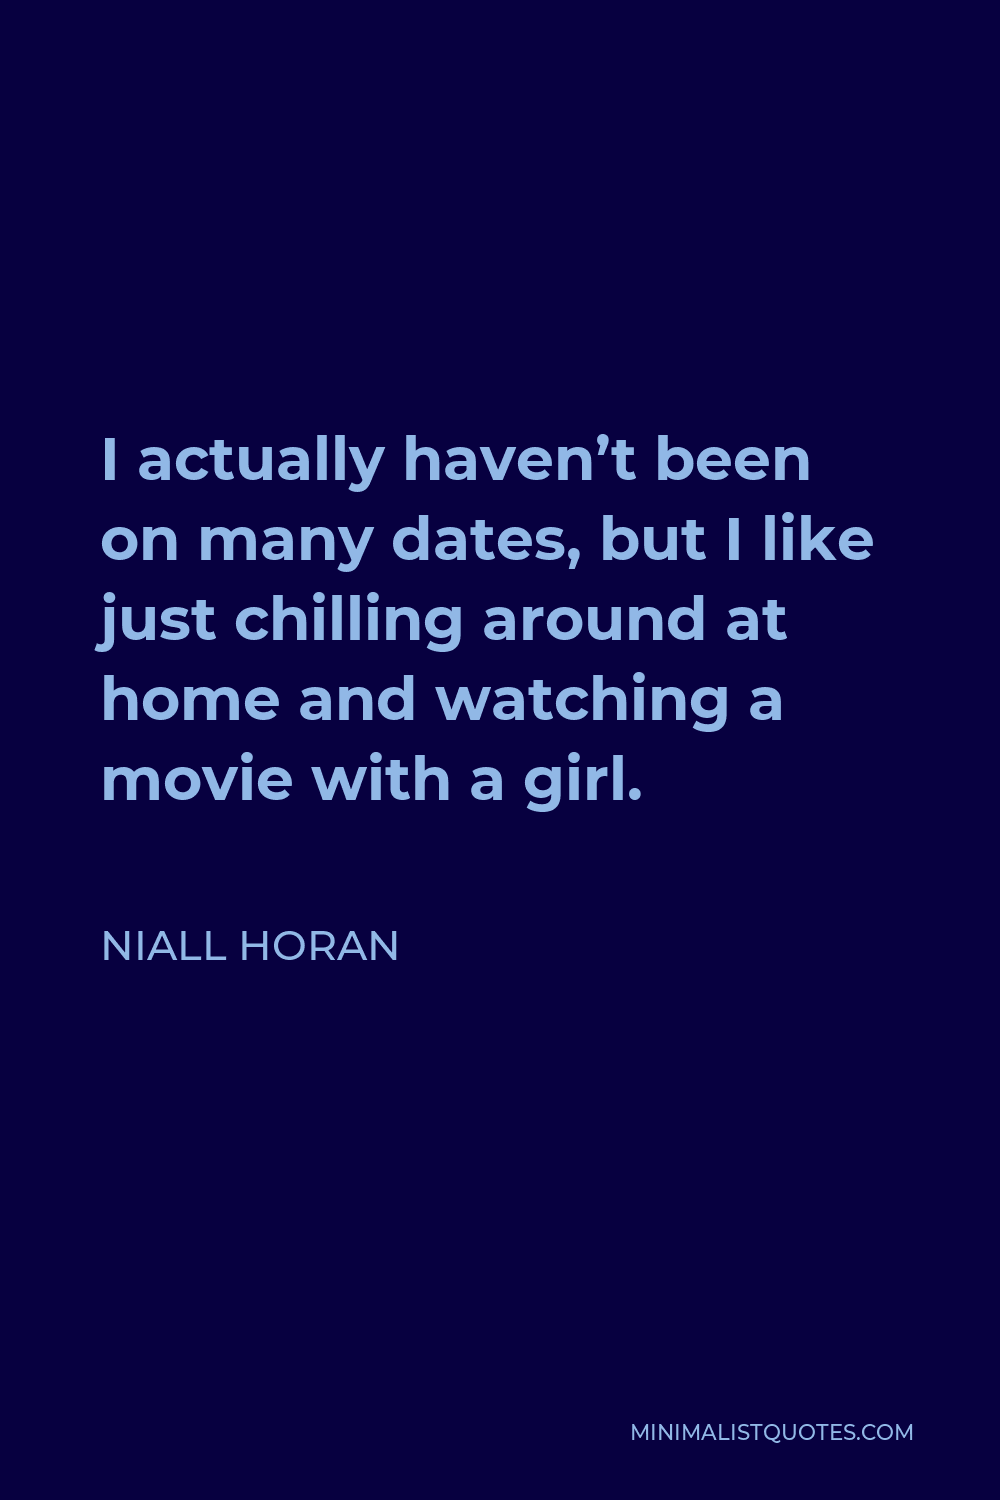 Niall Horan Quote - I actually haven’t been on many dates, but I like just chilling around at home and watching a movie with a girl.